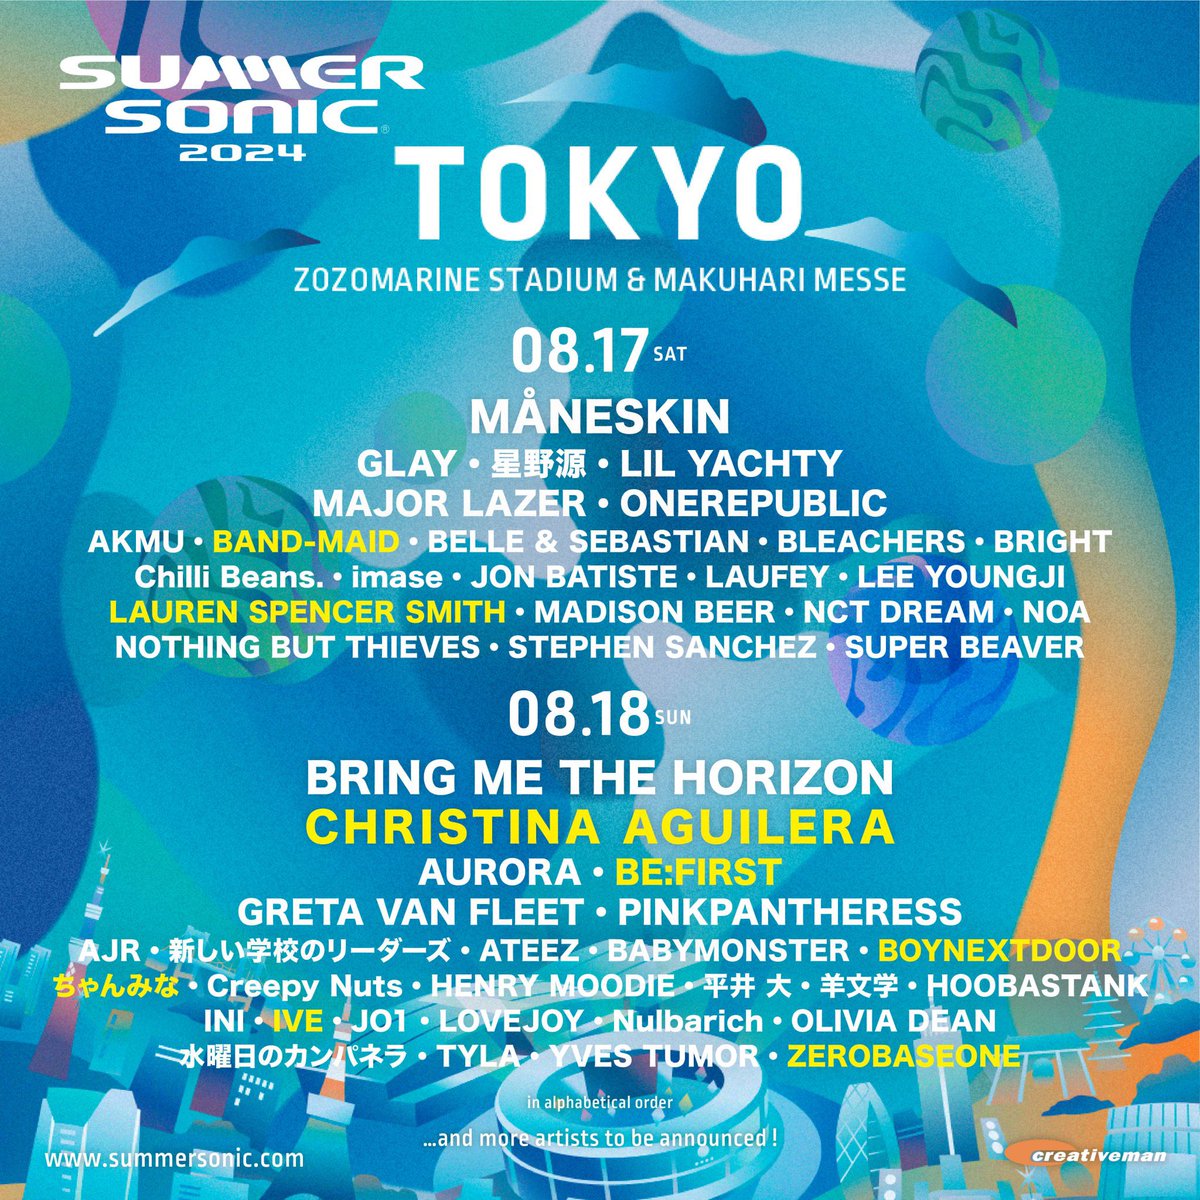 [NEWS]
BAND-MAID will perform at 'SUMMER SONIC 2024' on Saturday, August 17.

For more information, please visit
summersonic.com

2024/8/17,18開催！
「SUMMER SONIC 2024」に、BAND-MAID出演決定！
BAND-MAIDは8/17(土)に出演いたします。

詳細は下記をご覧ください。